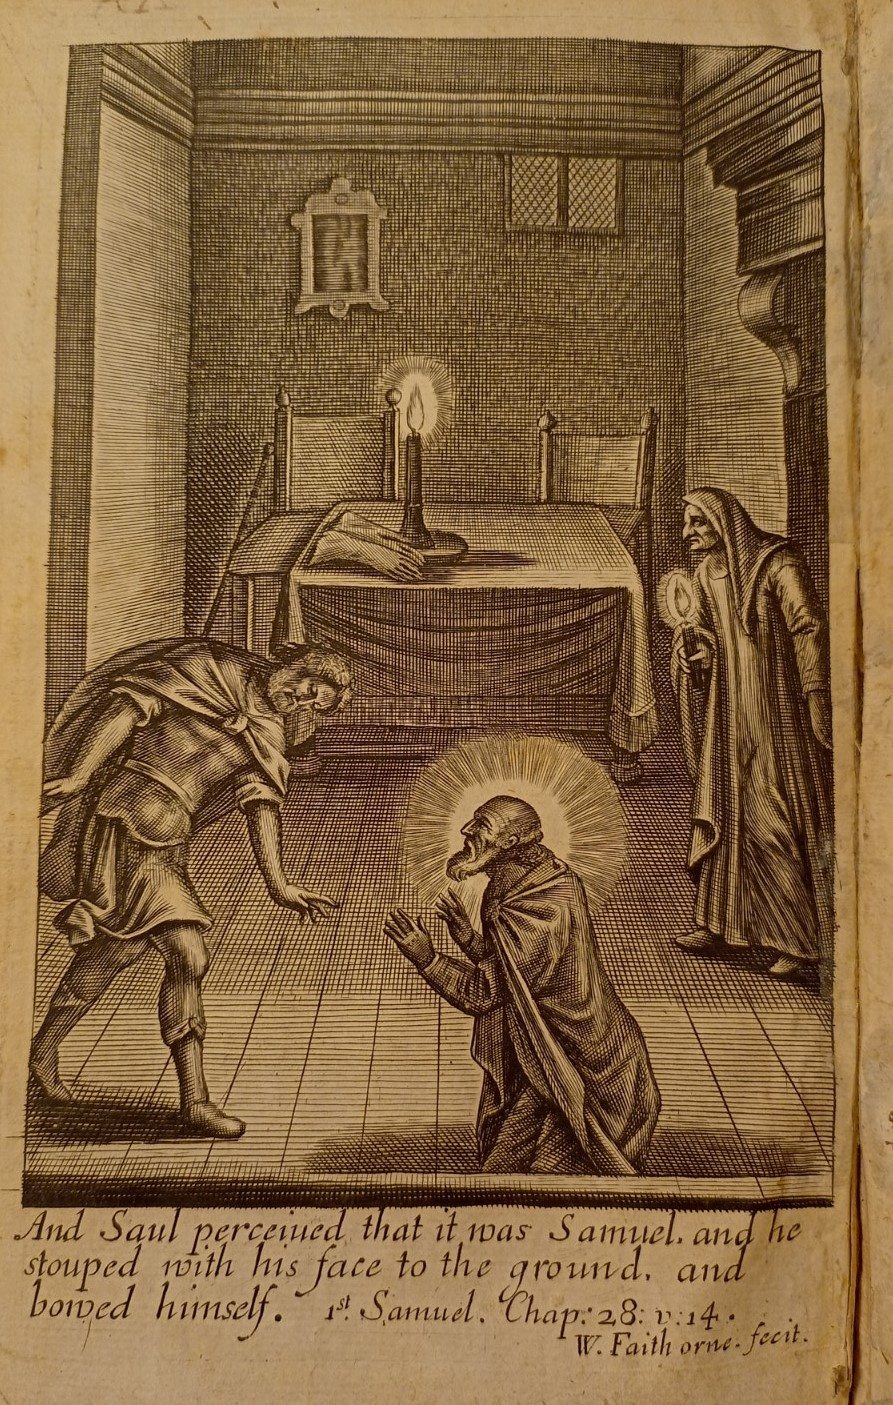 Engraving of Saul and Samuel